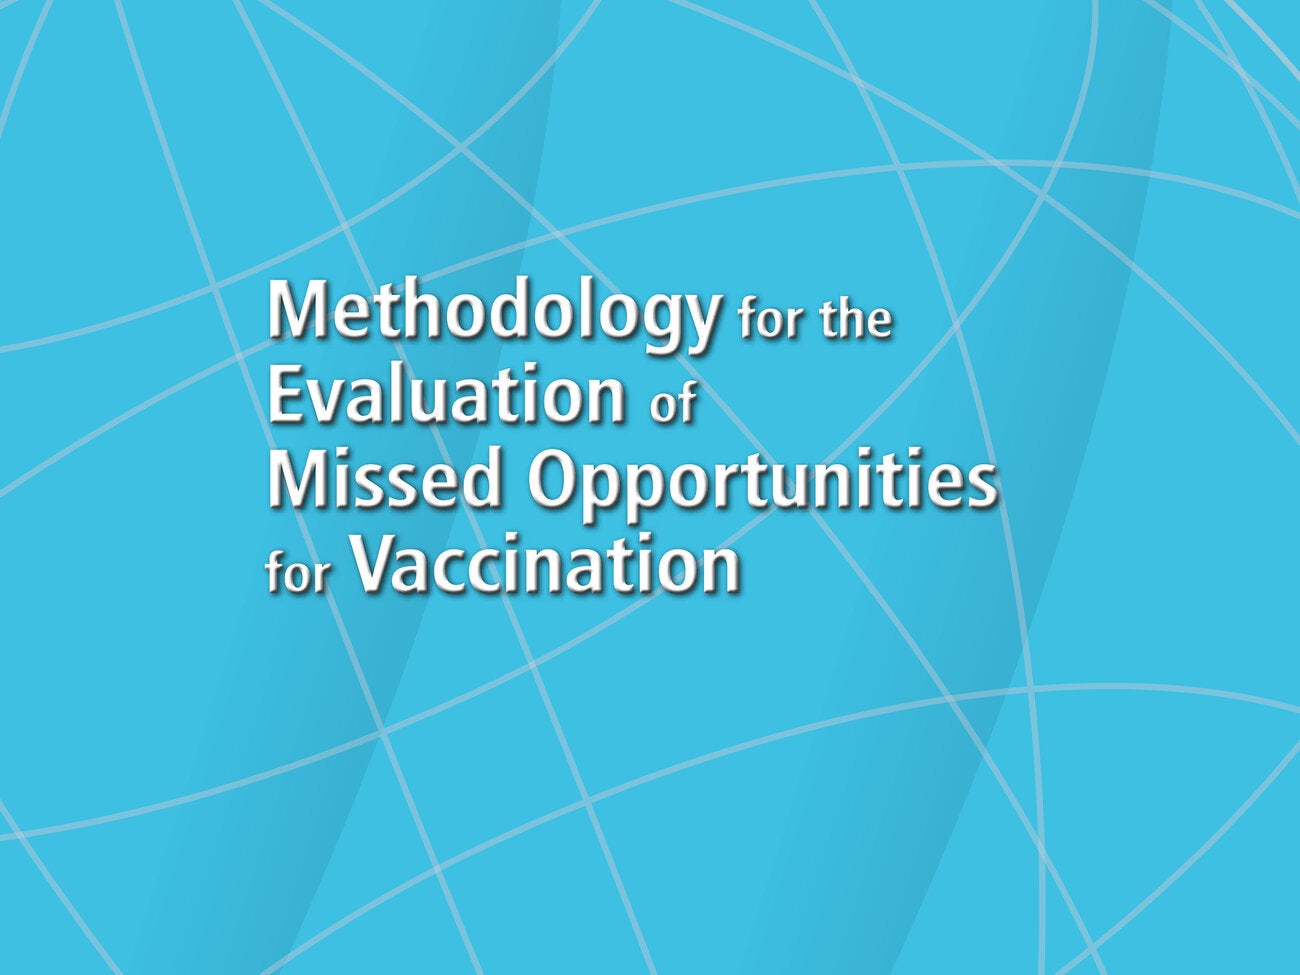 Missed Opportunities for Vaccination